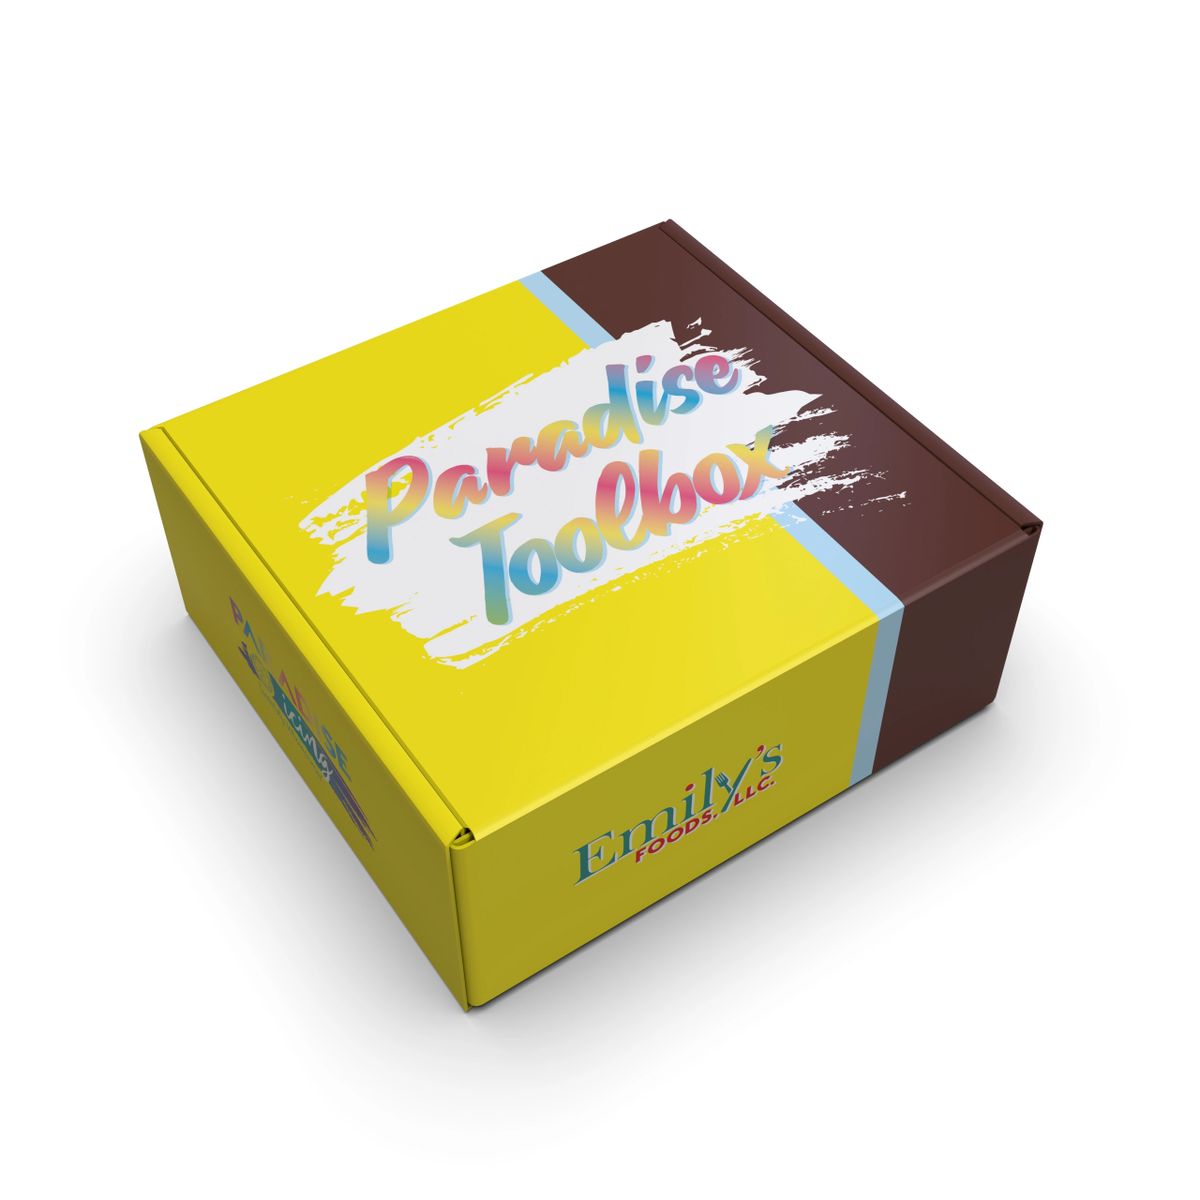 Download Emily S Foods Paradise Snax Toolbox